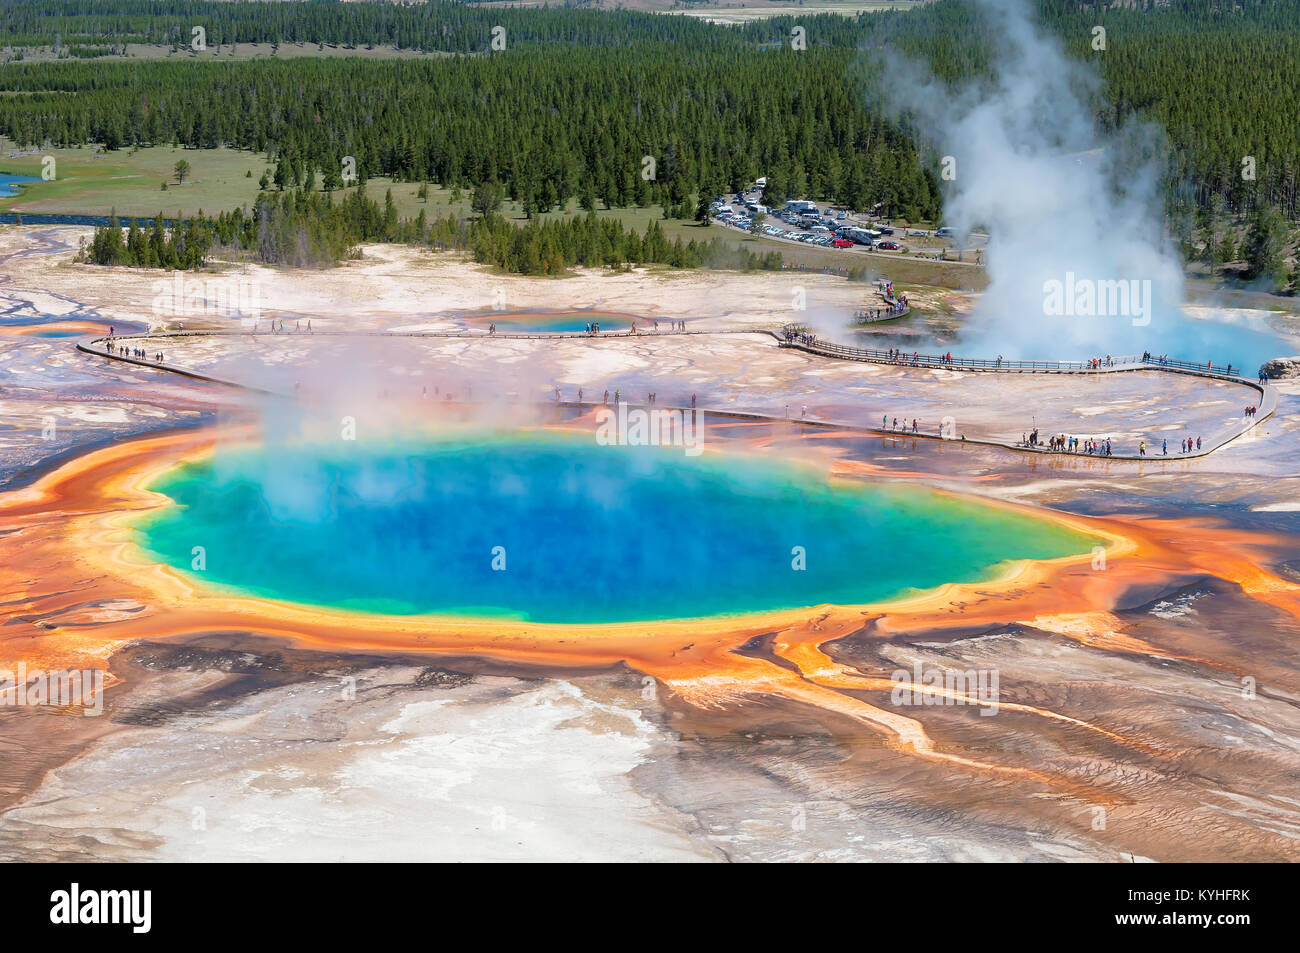 Grand Prismatic Spring - Thermal pool in Yellowstone national park, Wyoming. Stock Photo